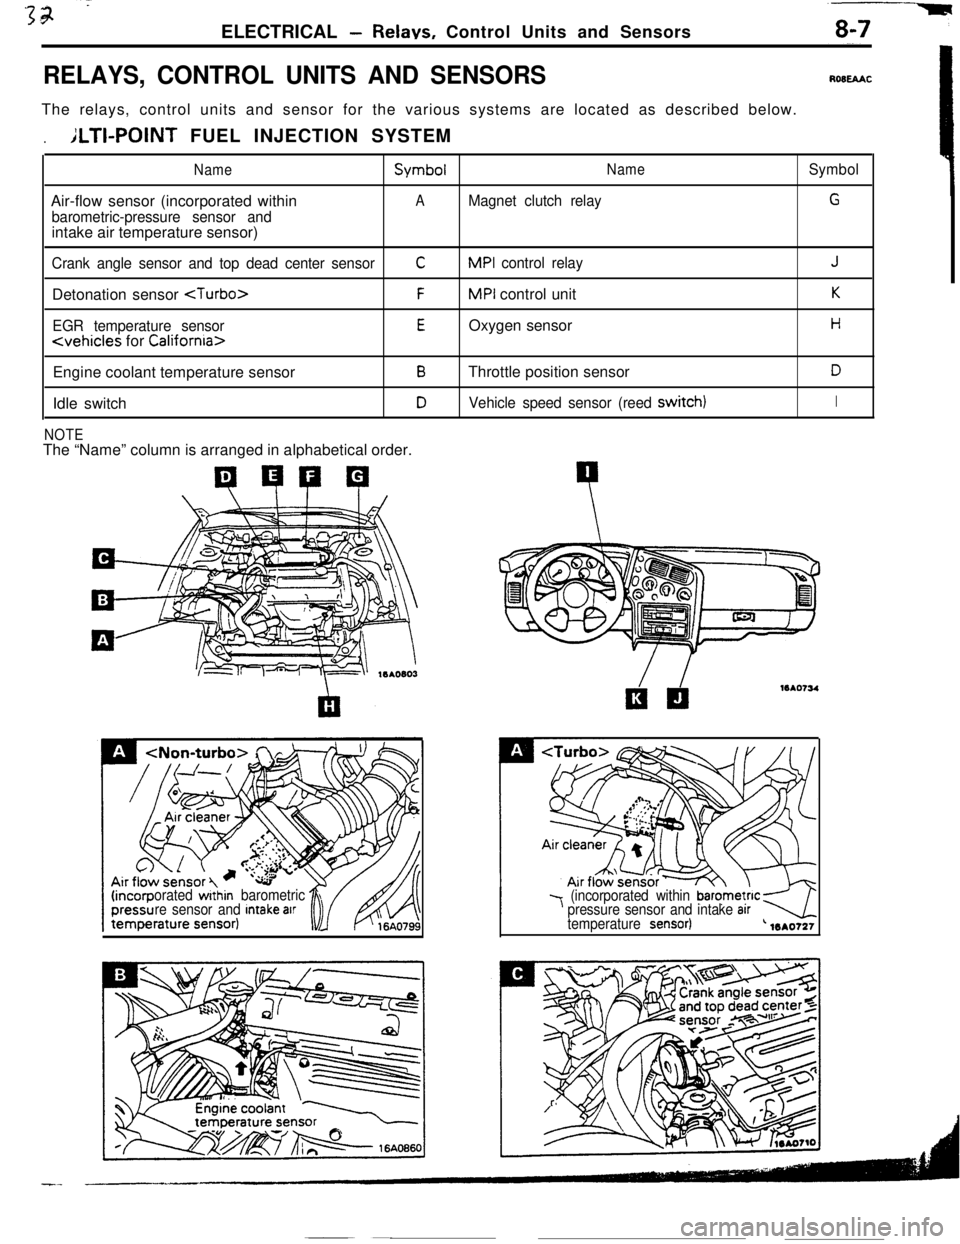 MITSUBISHI ECLIPSE 1990  Service Manual ELECTRICAL -Relavs, Control Units and Sensors
RELAYS, CONTROL UNITS AND SENSORSROBEAACThe relays, control units and sensor for the various systems are located as described below.
.ILTI-POINT FUEL INJE